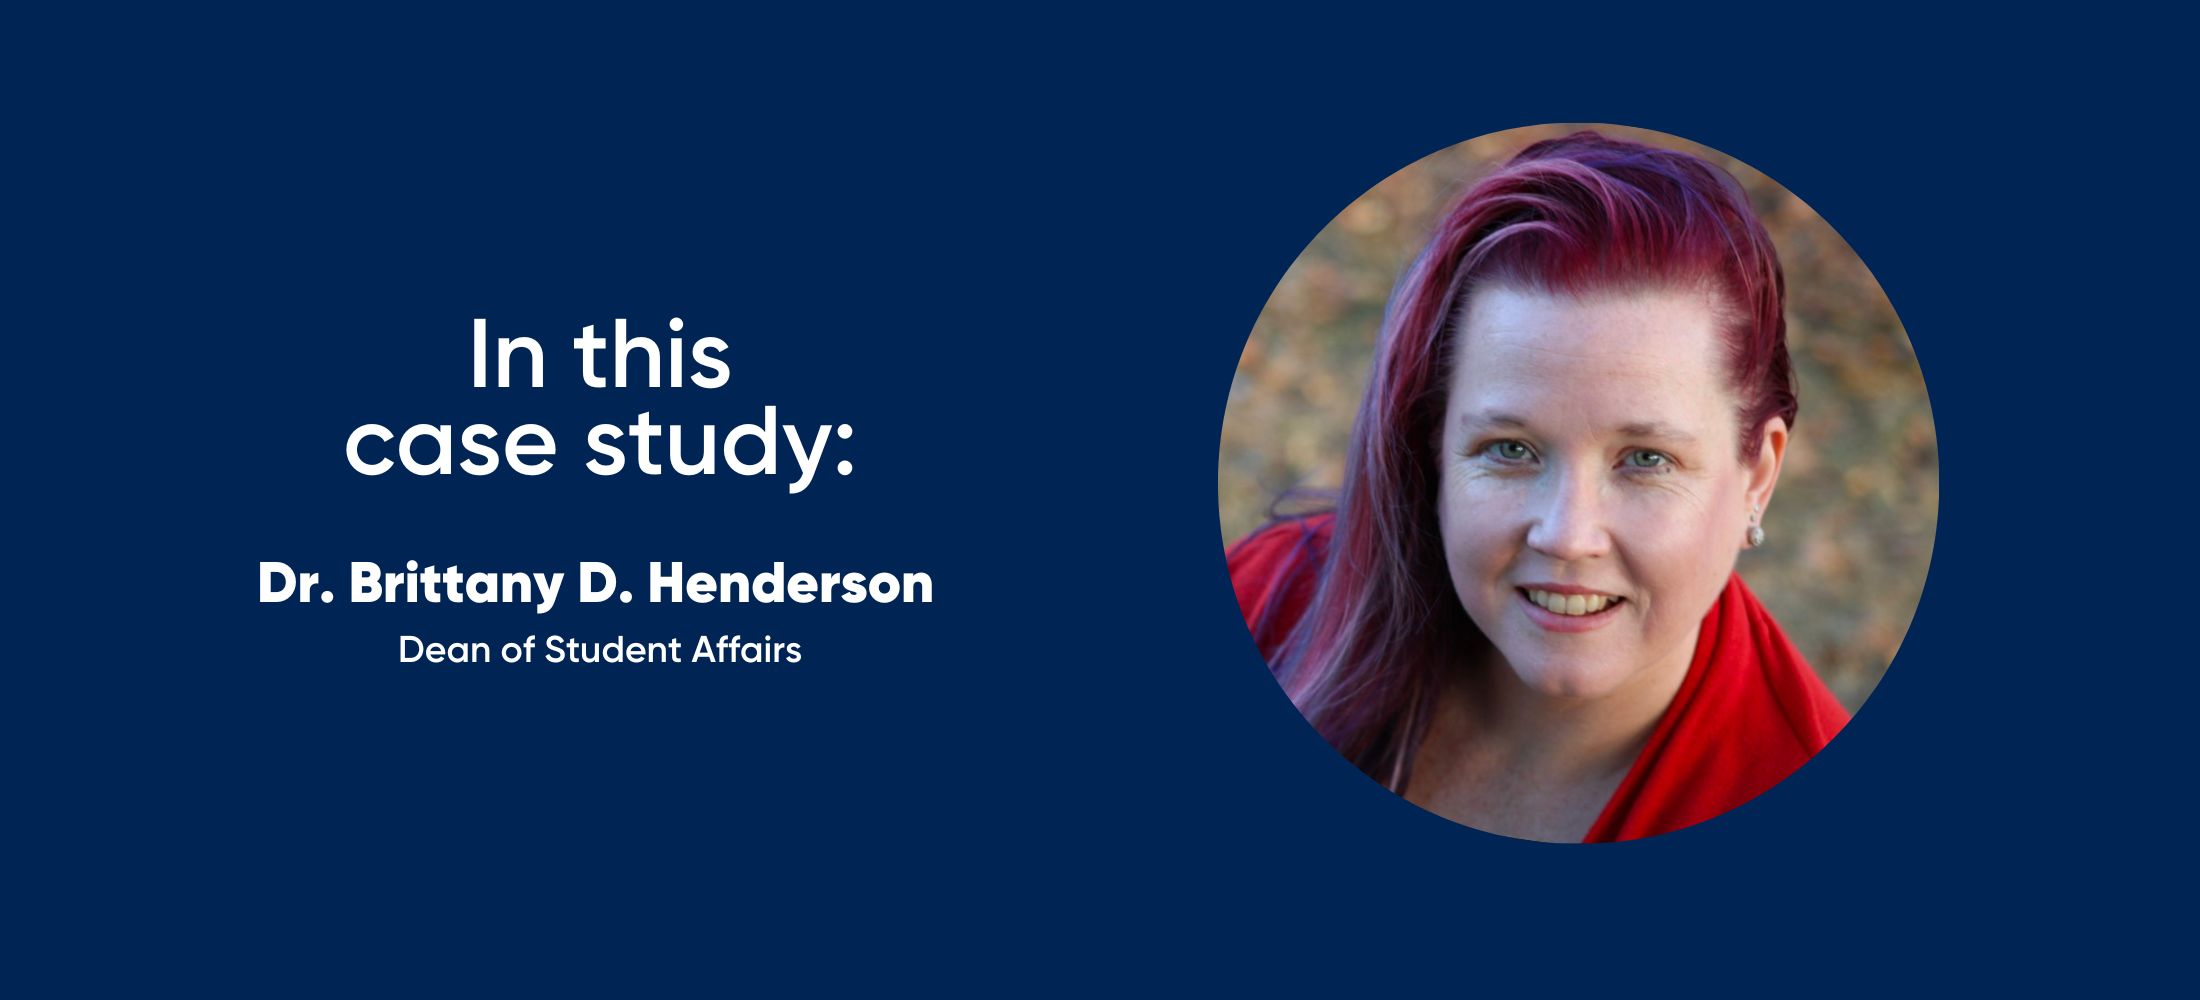 in this case study: Dr. Brittany D. Henderson - Dean of Student Affairs